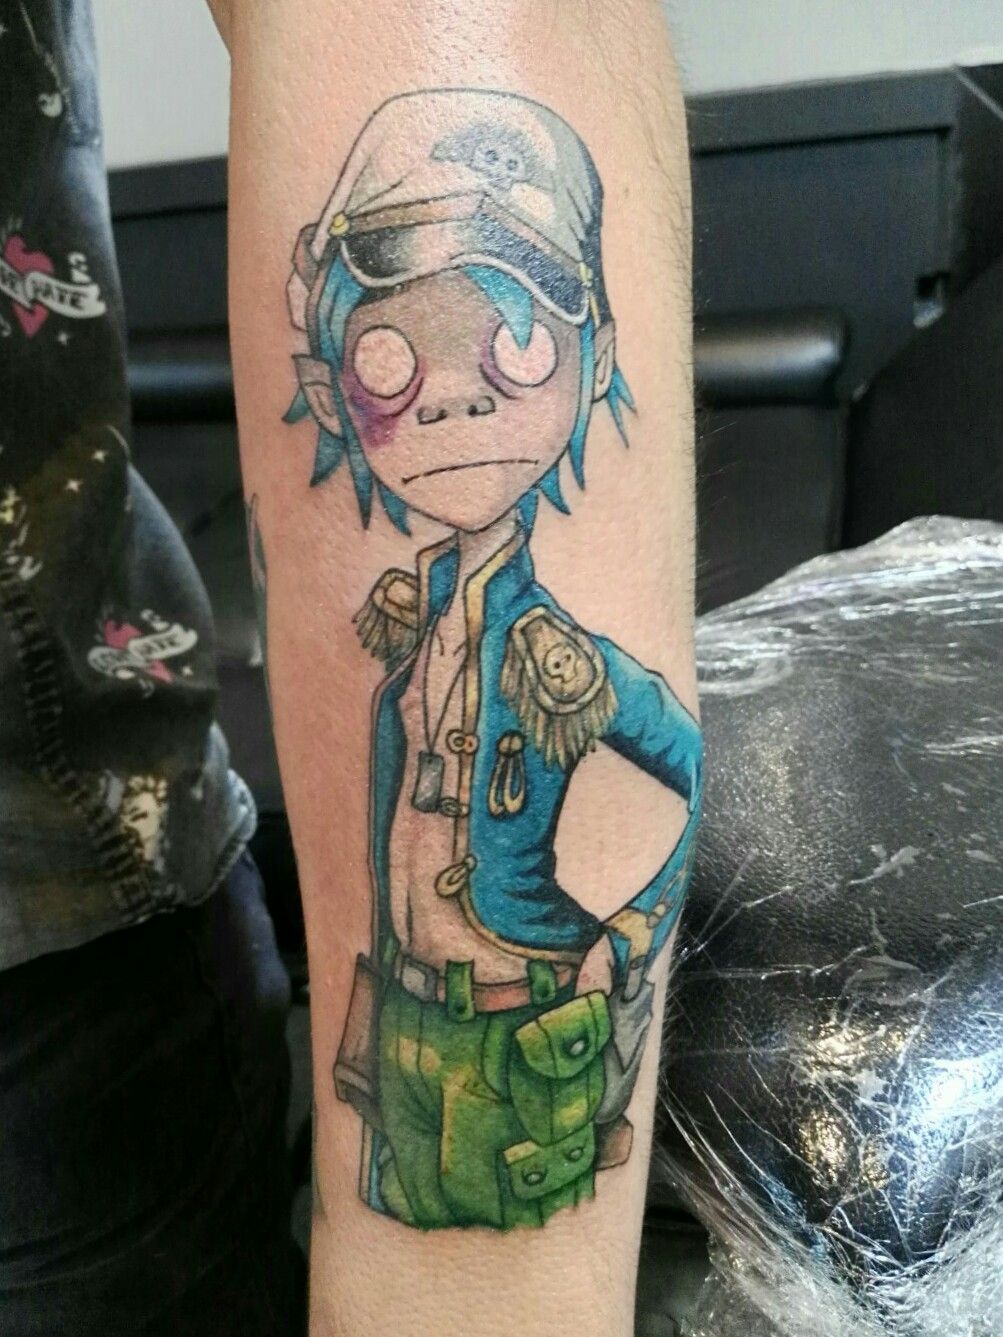 Tiger Lotus Tattoo and Piercing Inc  2D from The Gorillaz Tattoo by  Felicia  Facebook